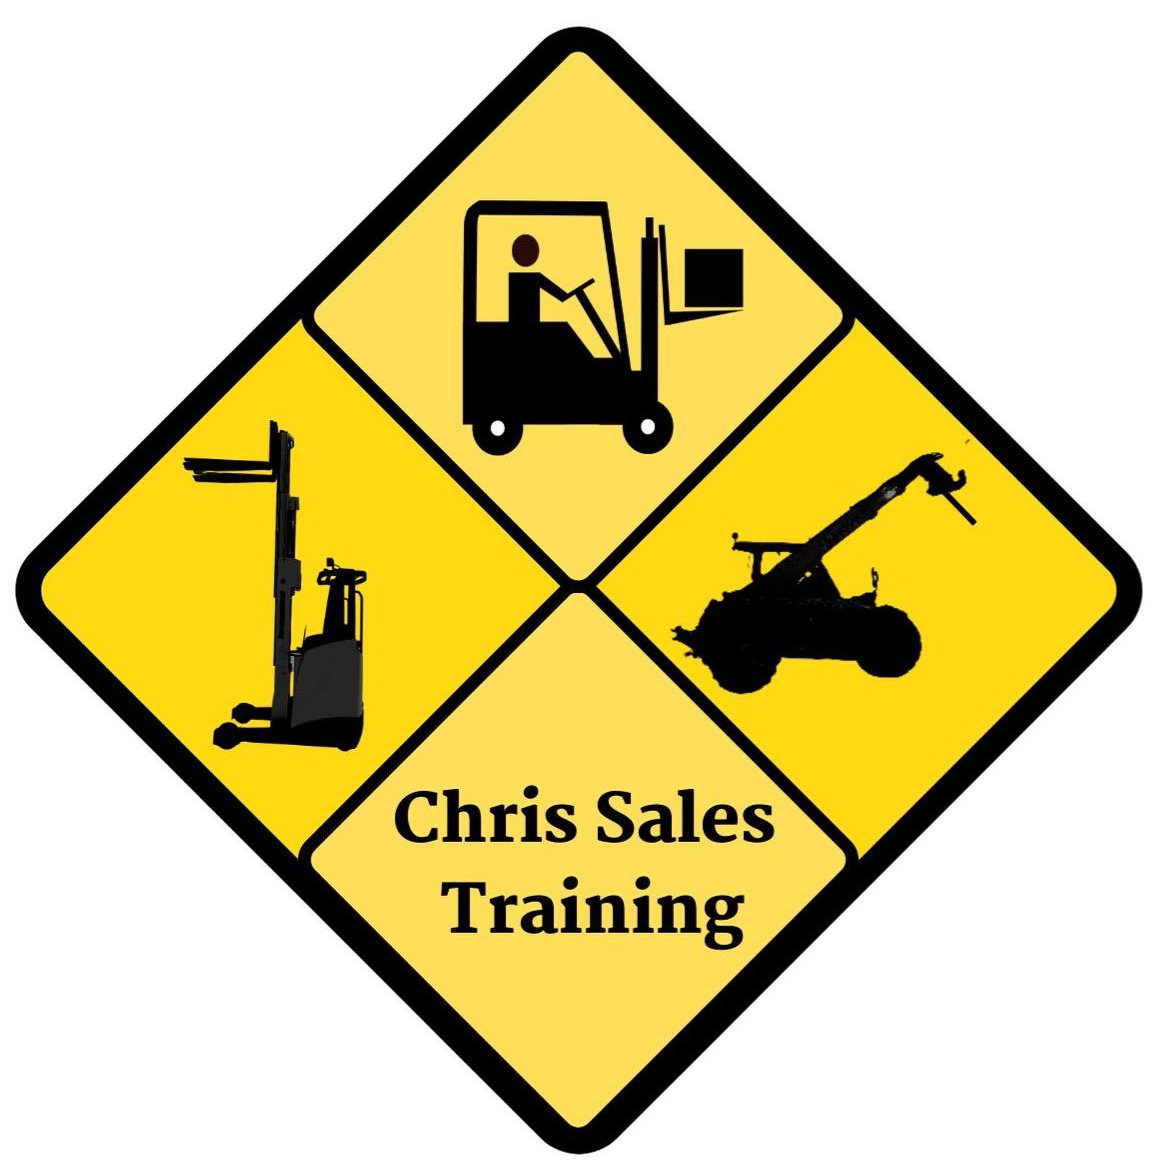 Chris Sales Fork Lift Truck Training - St. Neots, Cambridgeshire PE19 6NW - 01954 718648 | ShowMeLocal.com